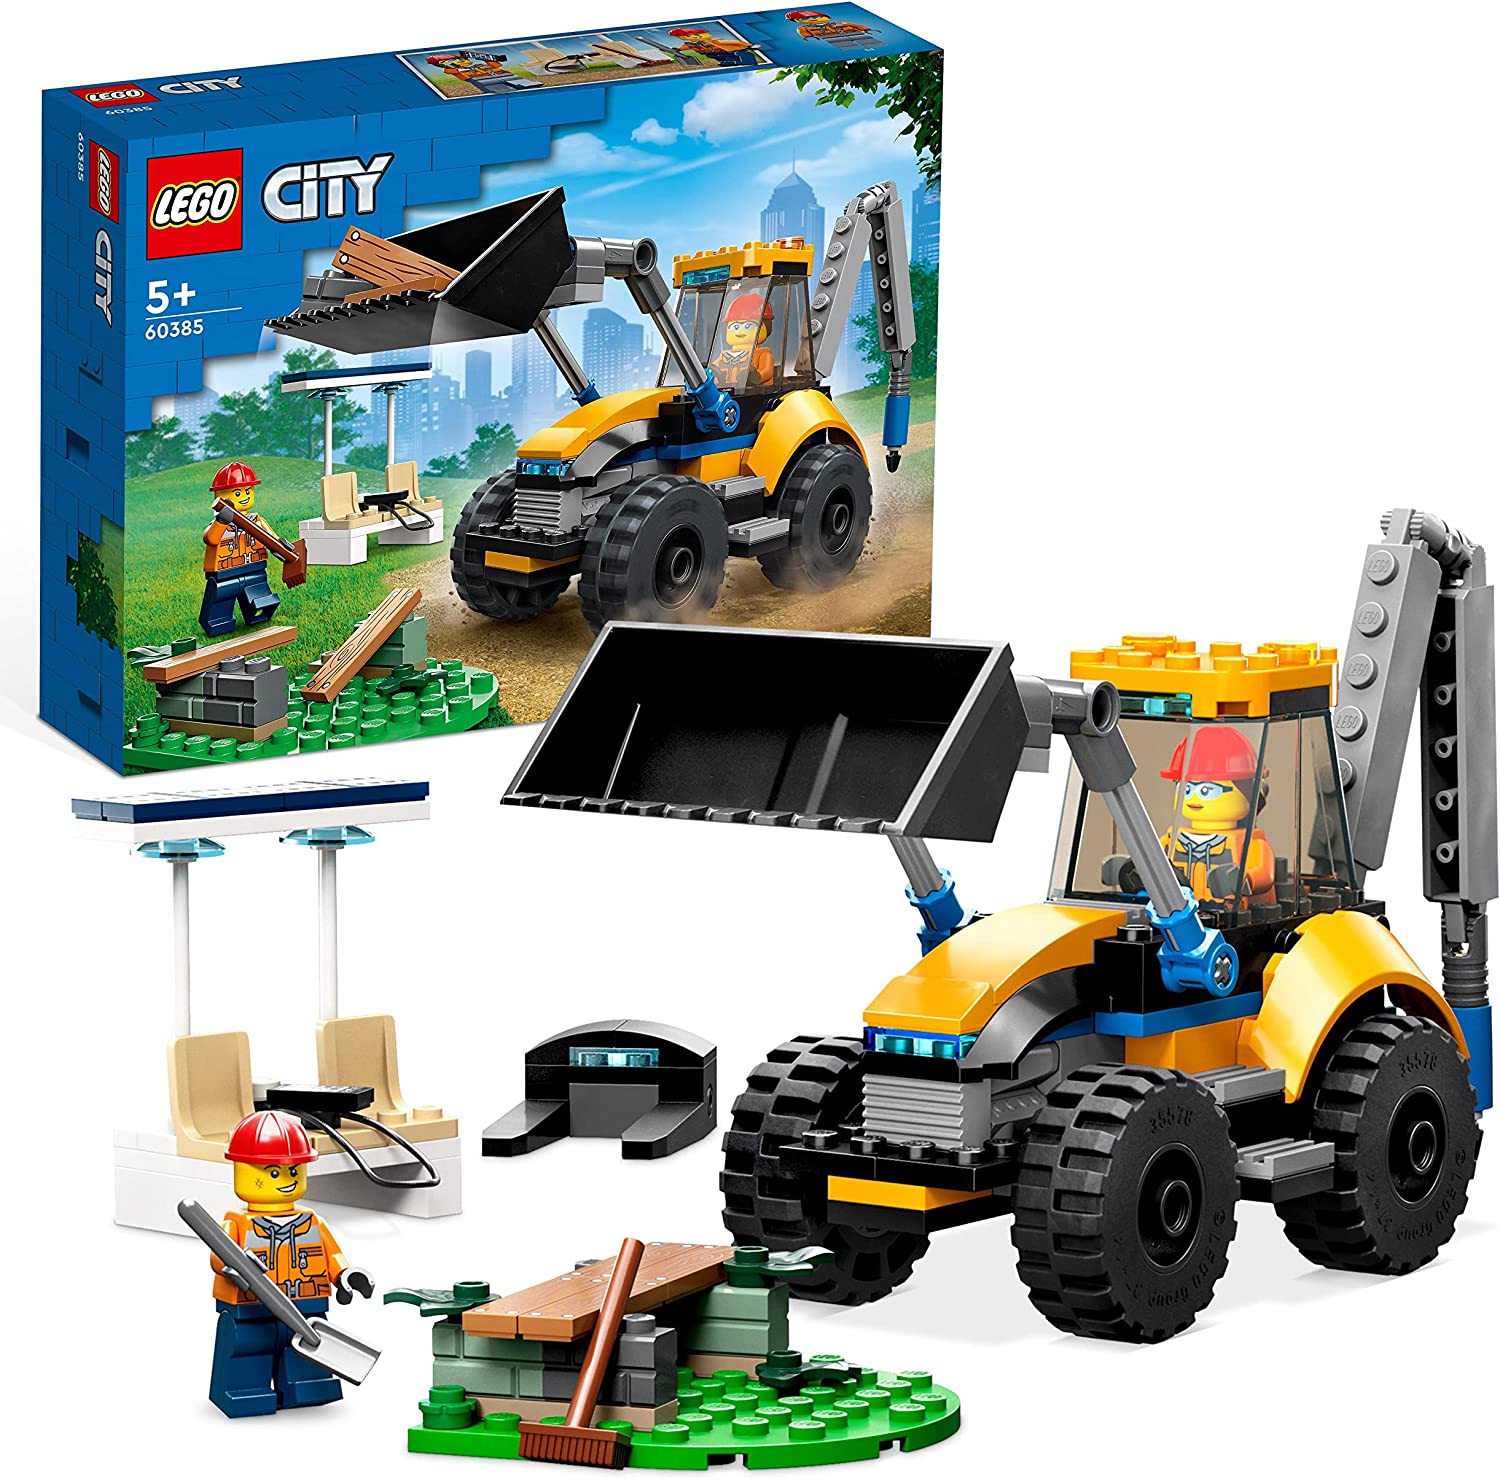 LEGO 60385 City Wheel Loader Construction Vehicle, Excavator Toy for Children as Educational Toy with Mini Figures, Construction Vehicle Gift for Birthday from 5 Years